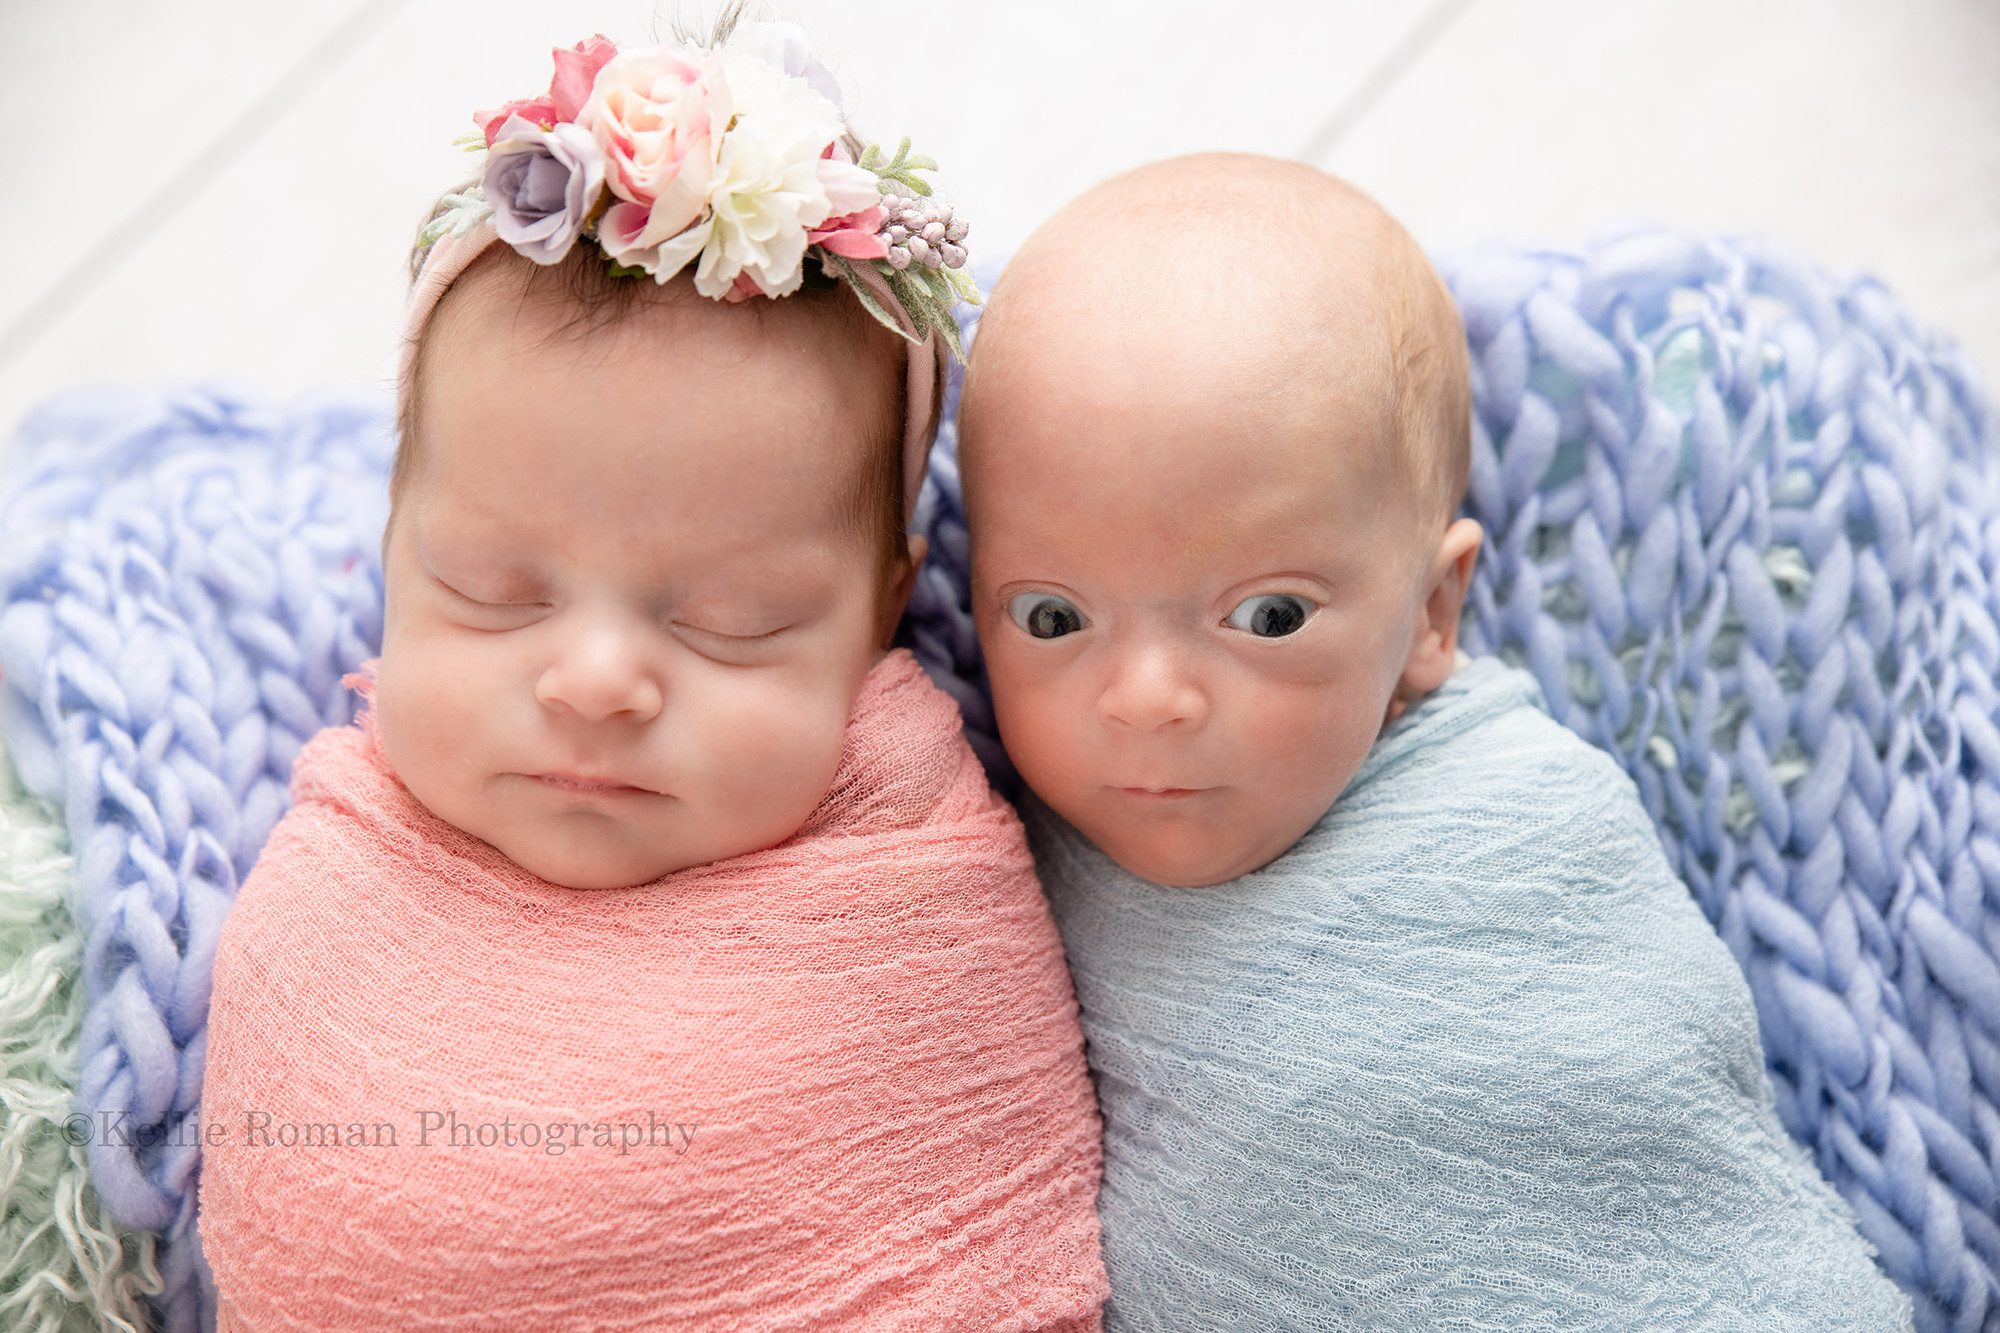 milwaukee twins one boy and one girl newborn twins in milwaukee photo studio they boy has a blue swaddle fabric on and the girl in a pink swaddle fabric the girls has a pink and purple floral headband and the boy is bald they are posed side by side on top of purple knit blanket the boy has his eyes wide open and the girl is sleeping